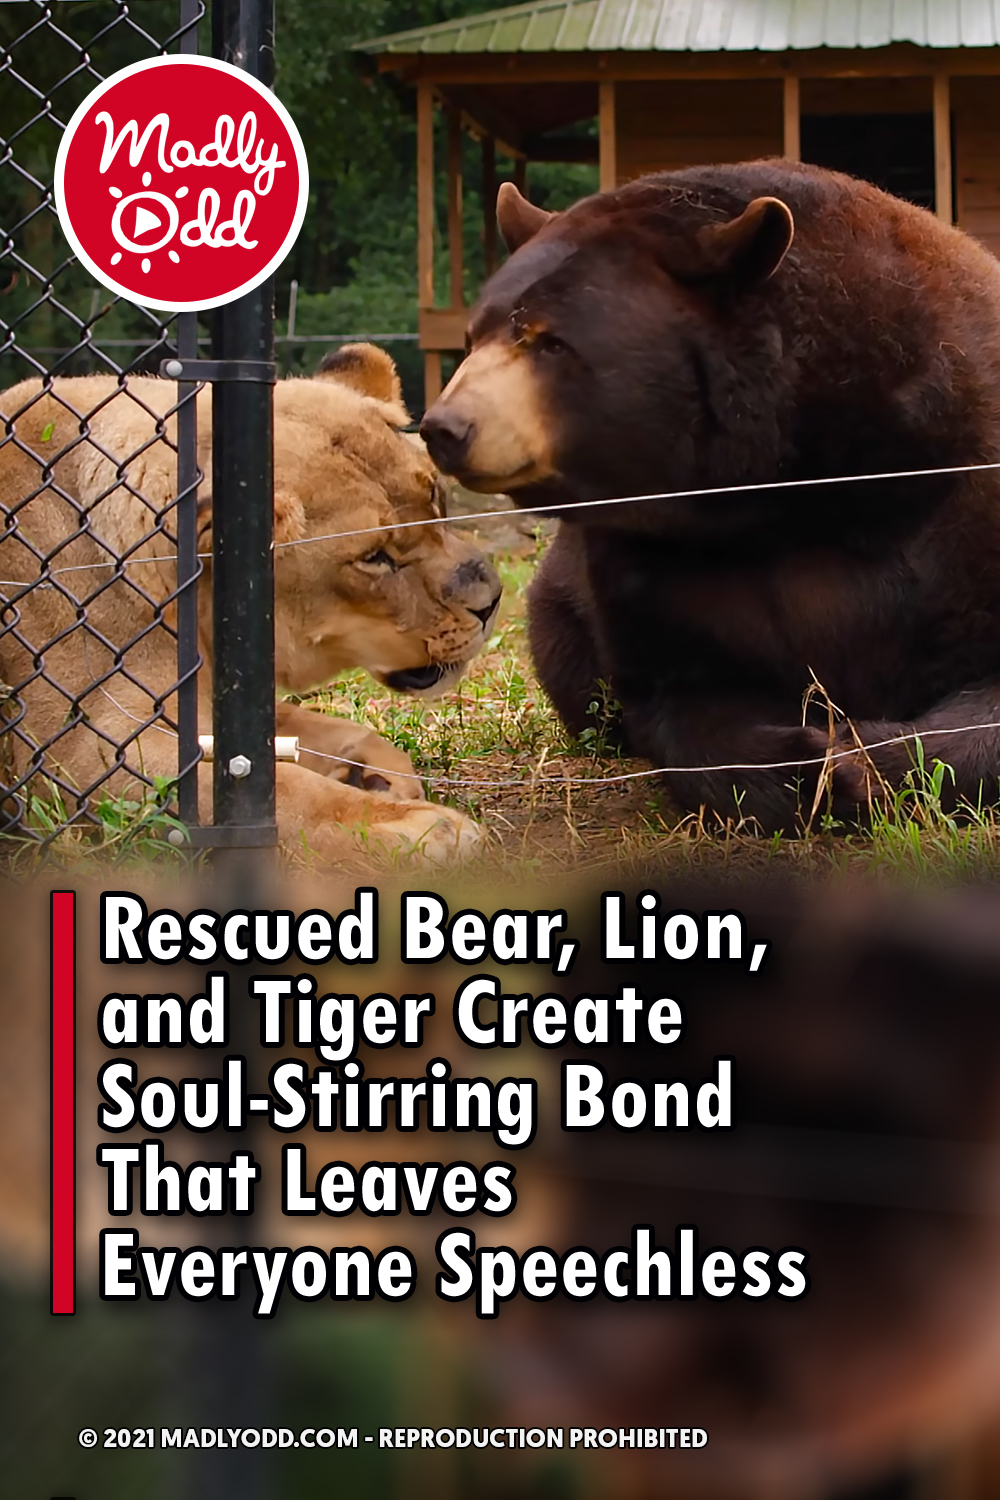 Rescued Bear, Lion, and Tiger Create Soul-Stirring Bond That Leaves Everyone Speechless